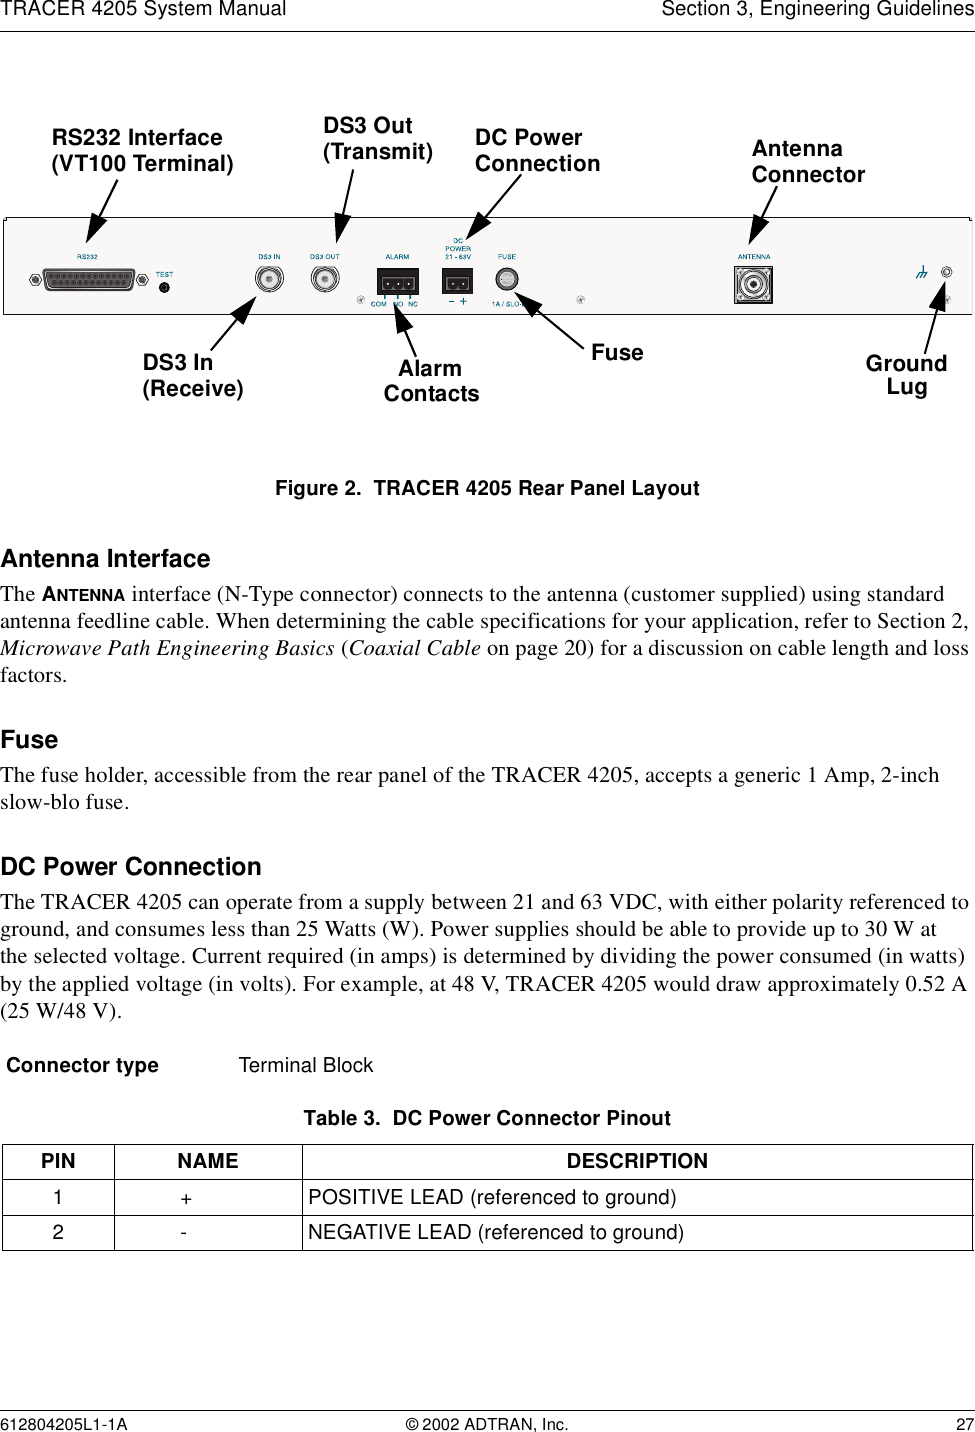 TRACER 4205 System Manual Section 3, Engineering Guidelines612804205L1-1A © 2002 ADTRAN, Inc. 27Figure 2.  TRACER 4205 Rear Panel LayoutAntenna InterfaceThe ANTENNA interface (N-Type connector) connects to the antenna (customer supplied) using standard antenna feedline cable. When determining the cable specifications for your application, refer to Section 2, Microwave Path Engineering Basics (Coaxial Cable on page 20) for a discussion on cable length and loss factors.FuseThe fuse holder, accessible from the rear panel of the TRACER 4205, accepts a generic 1 Amp, 2-inch slow-blo fuse.DC Power ConnectionThe TRACER 4205 can operate from a supply between 21 and 63 VDC, with either polarity referenced to ground, and consumes less than 25 Watts (W). Power supplies should be able to provide up to 30 W atthe selected voltage. Current required (in amps) is determined by dividing the power consumed (in watts) by the applied voltage (in volts). For example, at 48 V, TRACER 4205 would draw approximately 0.52 A (25 W/48 V).Connector type Terminal BlockTable 3.  DC Power Connector PinoutPIN NAME DESCRIPTION1 + POSITIVE LEAD (referenced to ground)2 - NEGATIVE LEAD (referenced to ground)AntennaDC PowerConnection ConnectorDS3 Out(Transmit)DS3 In(Receive)RS232 Interface(VT100 Terminal)GroundLugFuseAlarmContacts